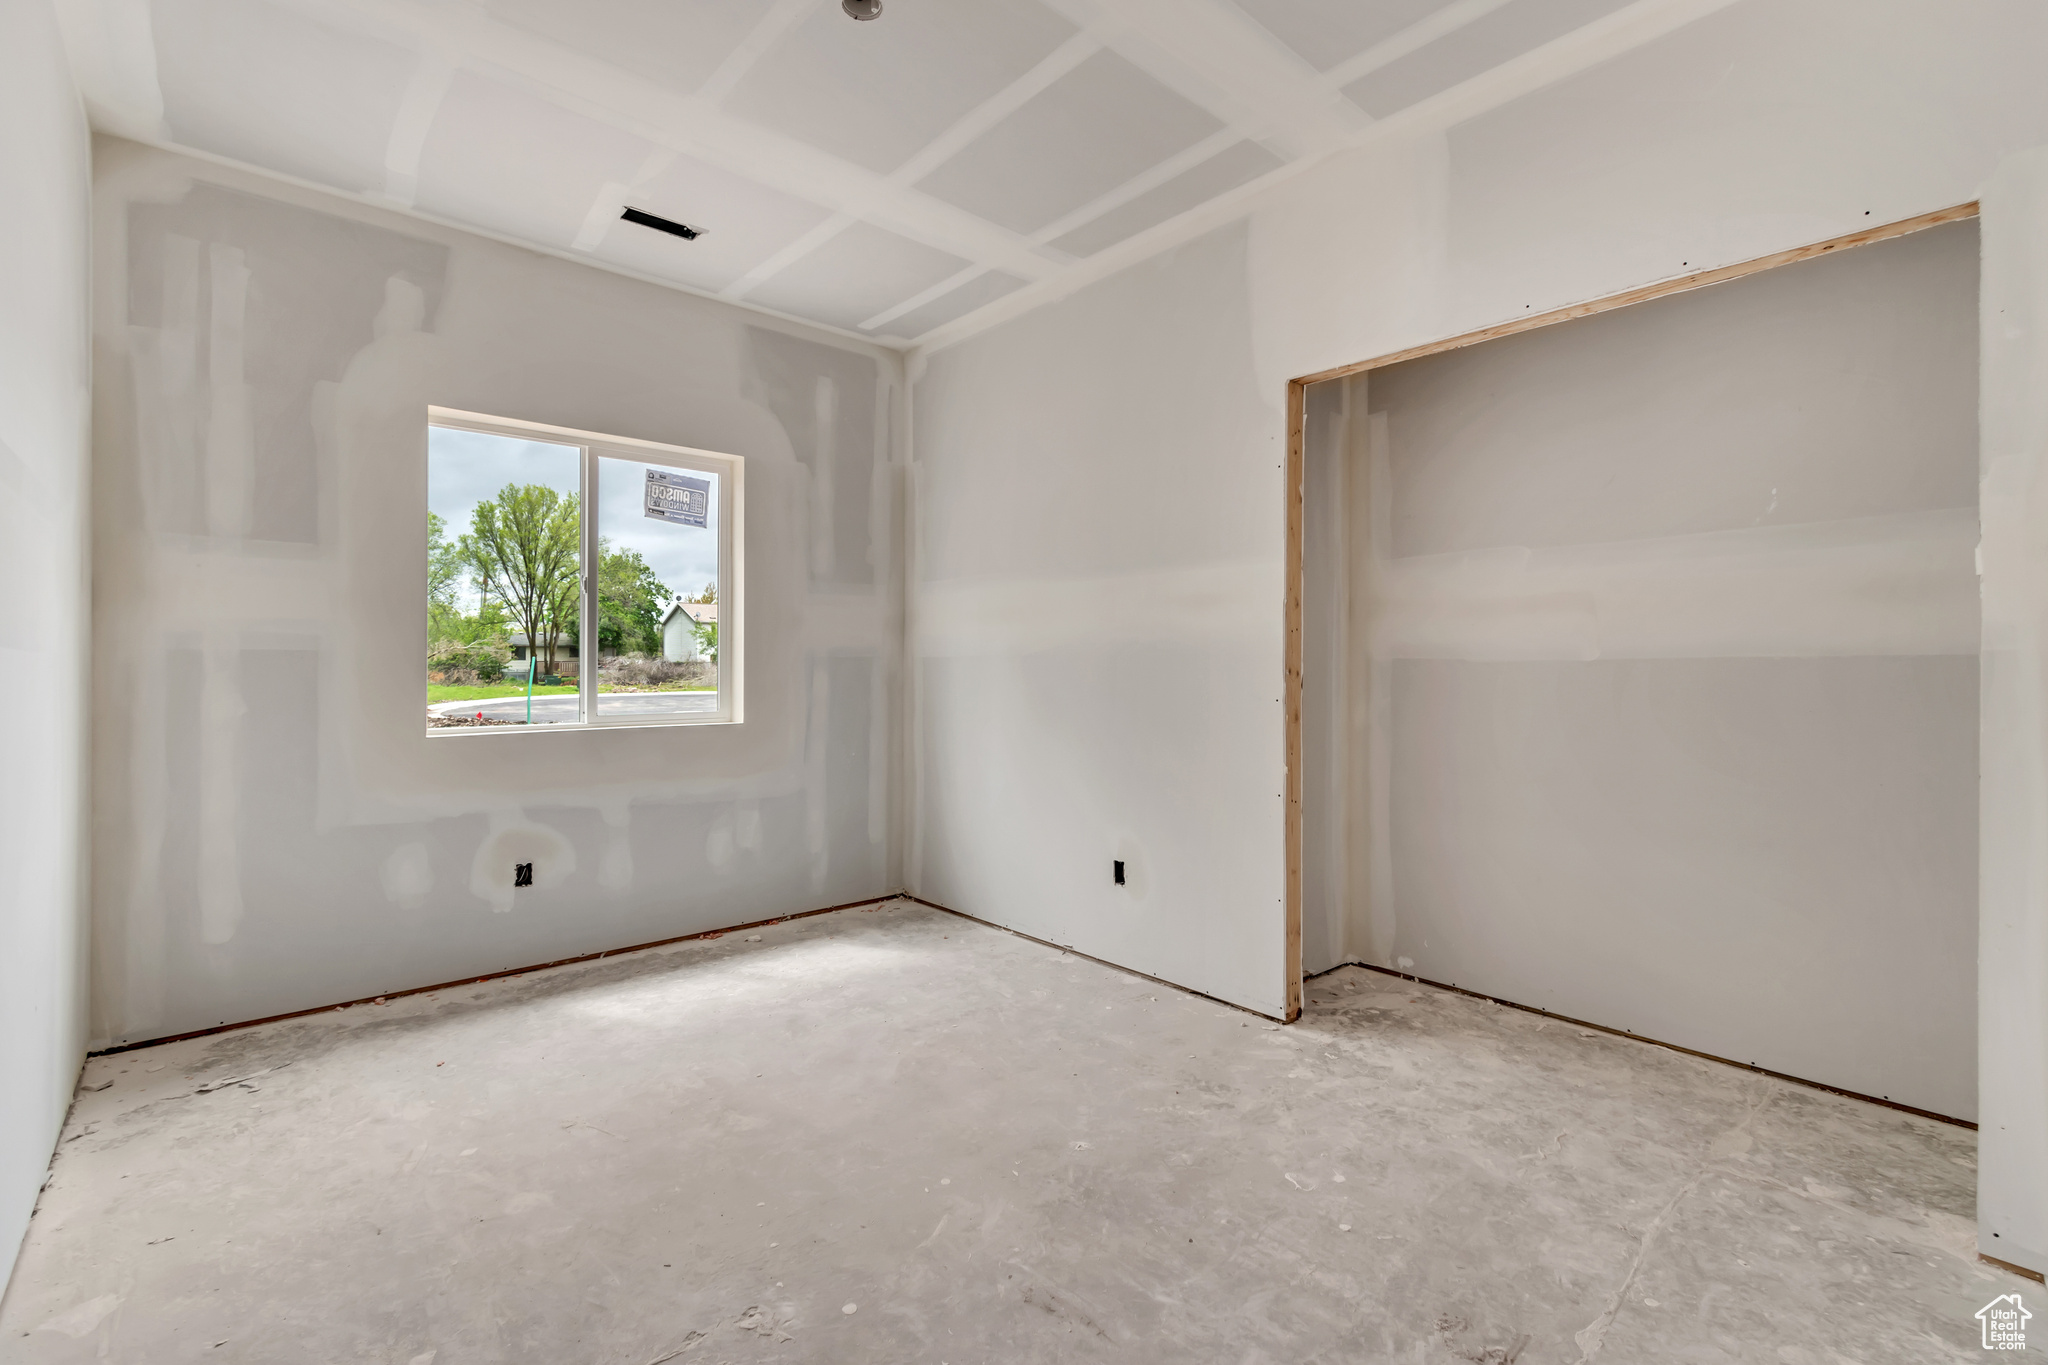 Spare room with concrete floors